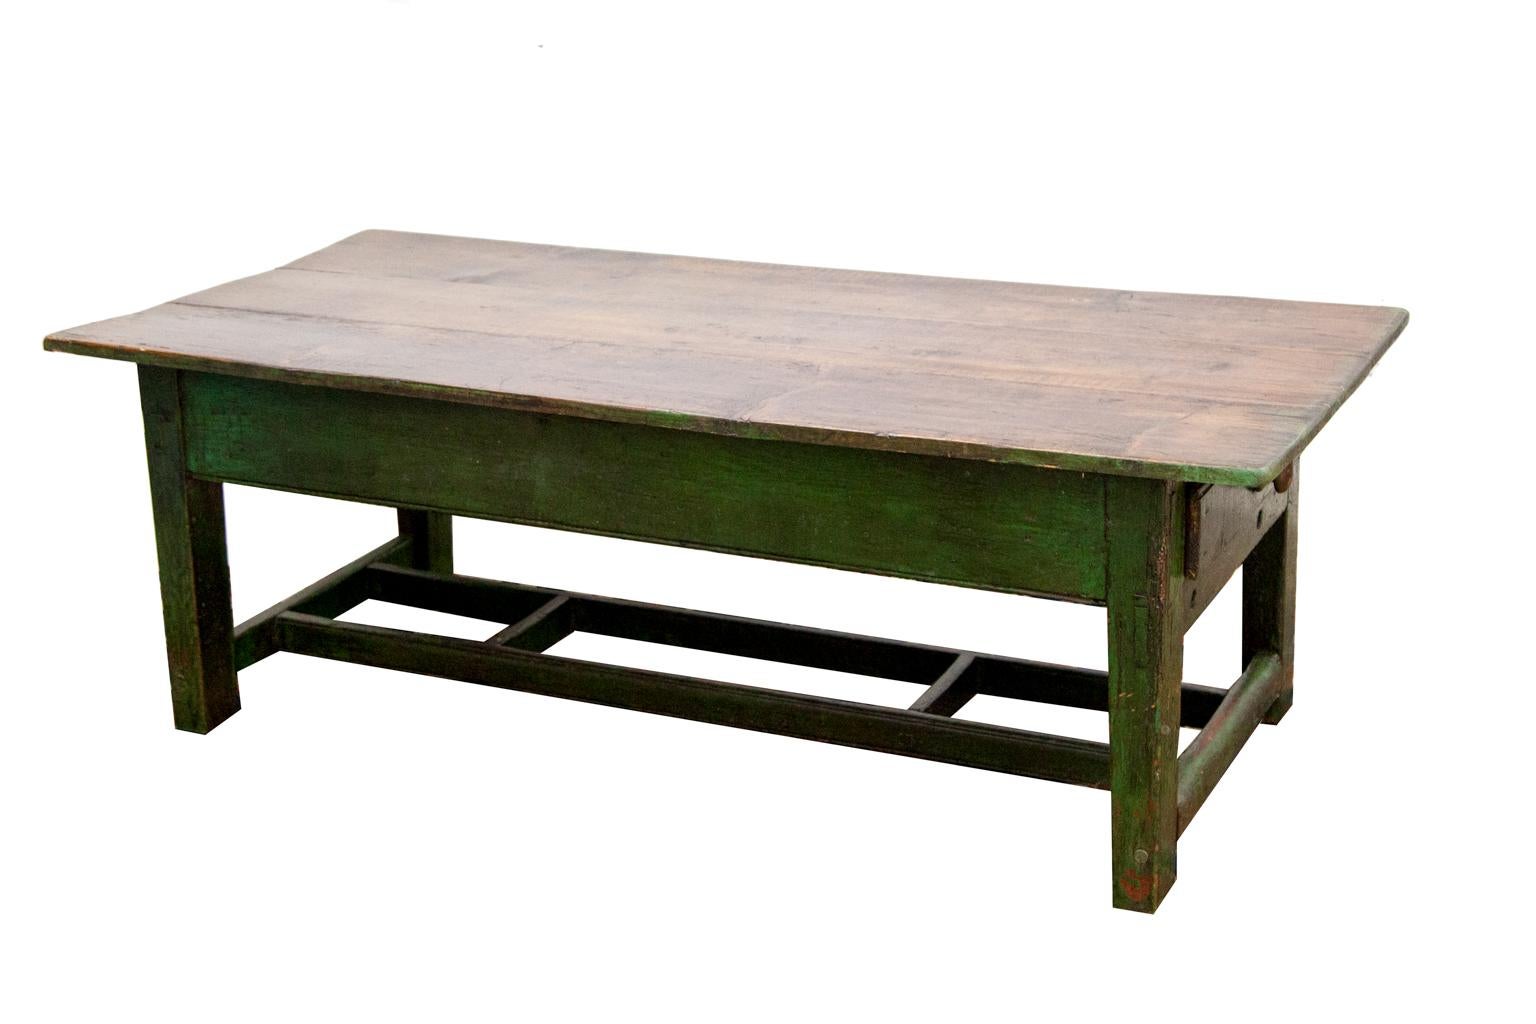 Painted pine coffee table, with one drawer at the end and a double-H stretcher below. The base is painted forest green, the top is scrubbed pine with green on the edges.